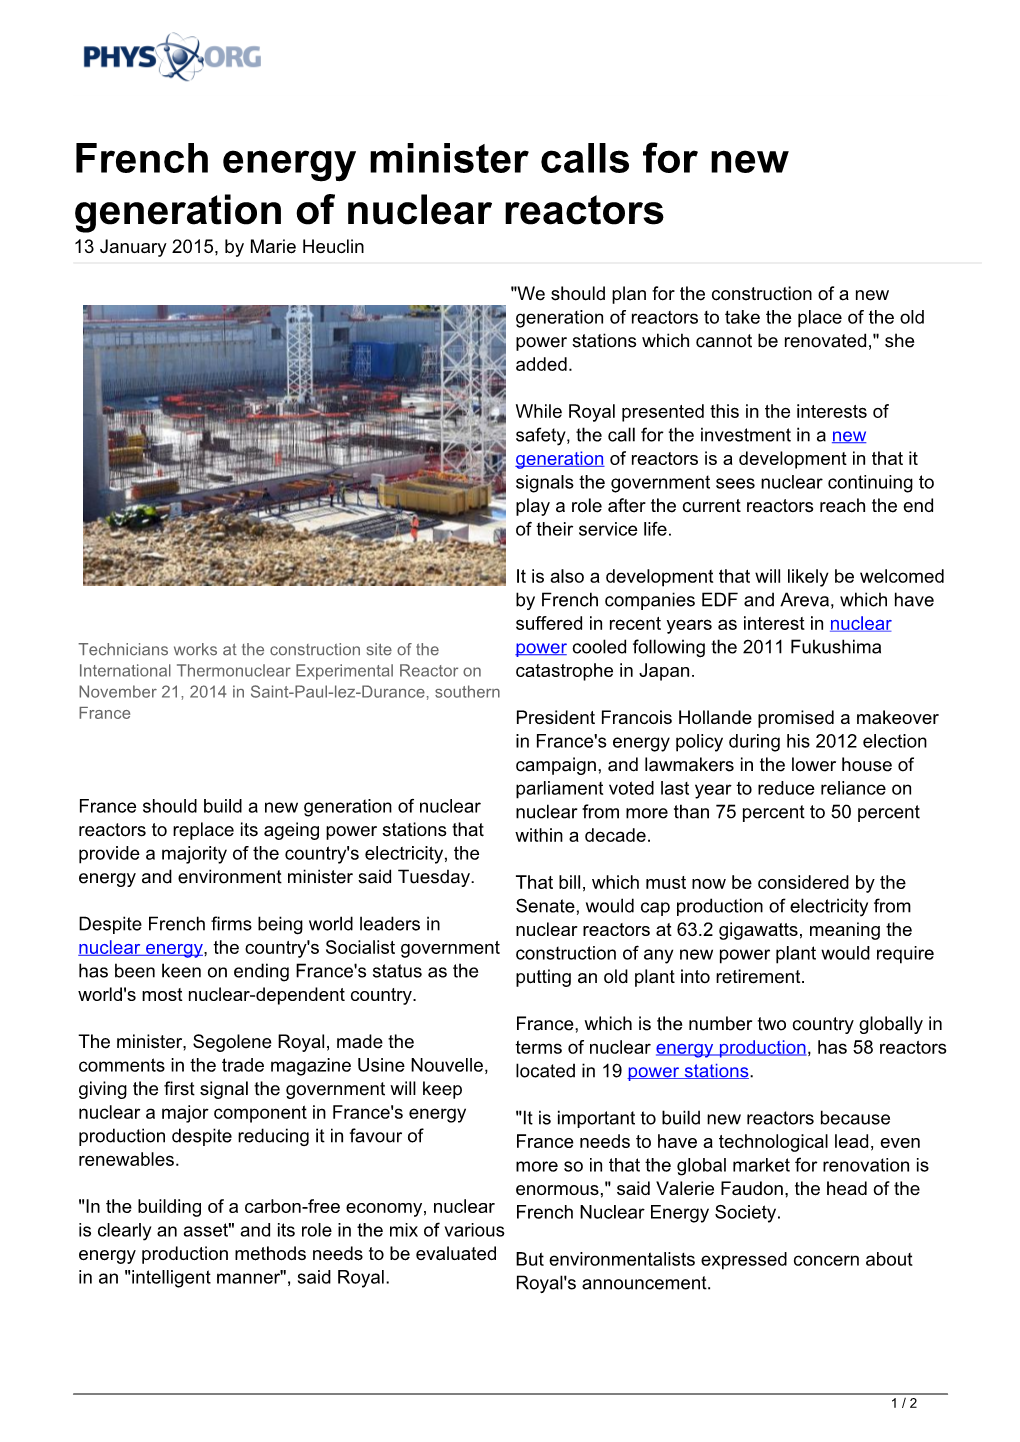 French Energy Minister Calls for New Generation of Nuclear Reactors 13 January 2015, by Marie Heuclin